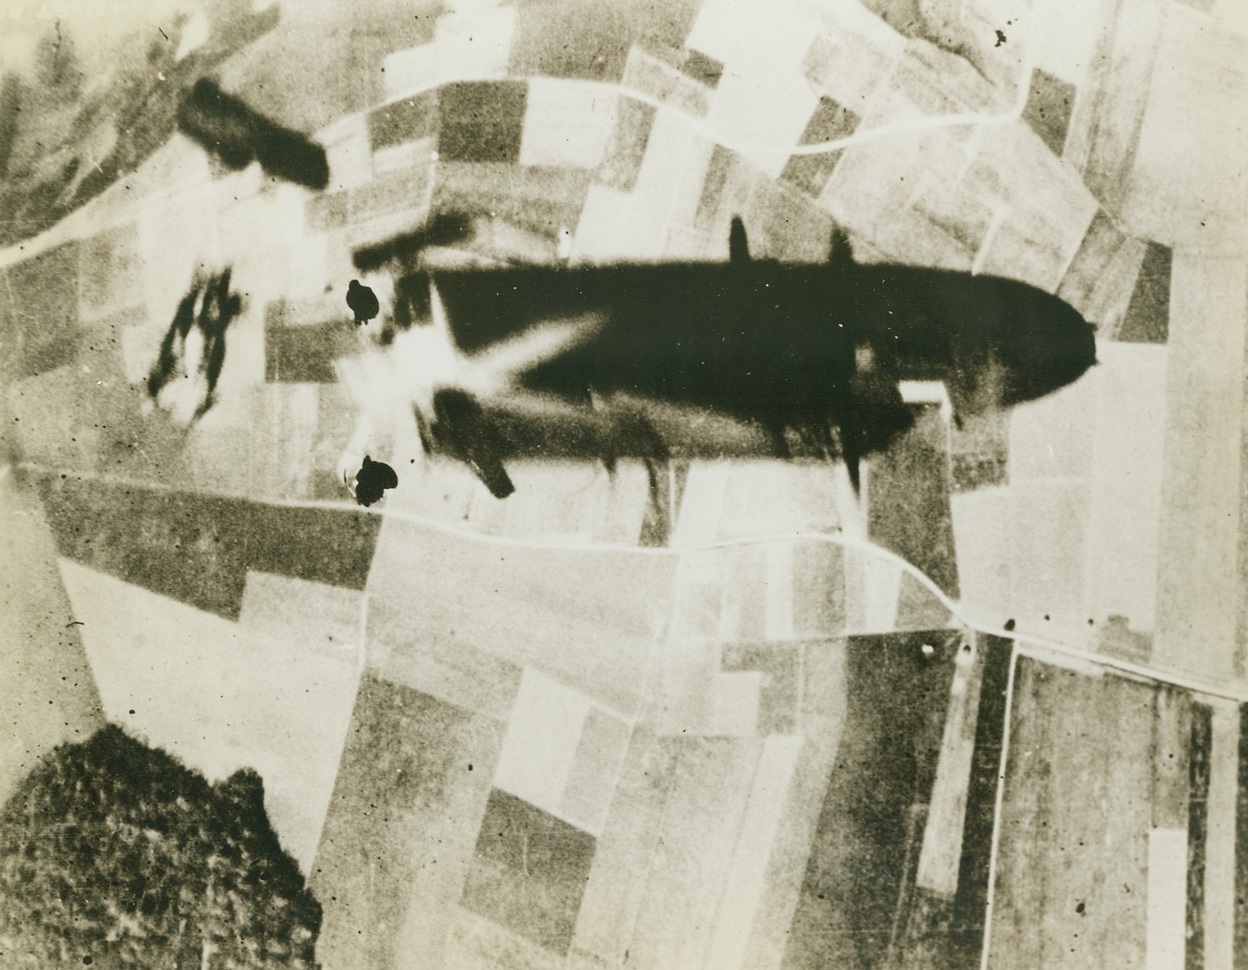 Death on the Wing, 6/29/1944. France – A B-26 Marauder, hit by flak over the French coast, literally is blown to bits, with only the nose of the once magnificent ship momentarily aloft. Remarkable photo was taken by accompanying plane’s camera. Credit: USAAF photo from ACME; France – A B-26 Marauder, hit by flak over the French coast, literally is blown to bits, with only the nose of the once magnificent ship momentarily aloft. Remarkable photo was taken by accompanying plane’s camera. Credit: USAAF photo from ACME;